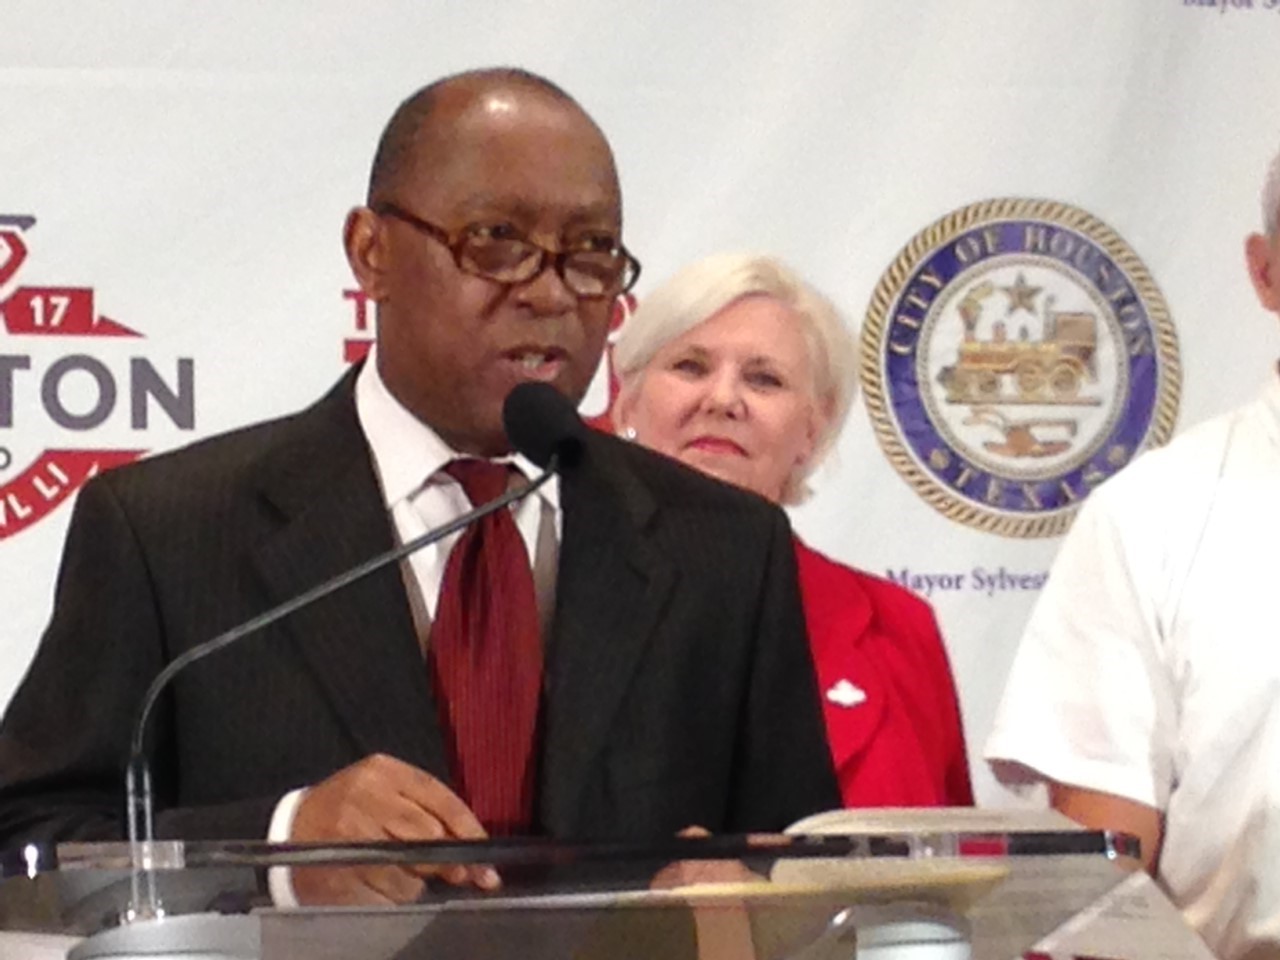 Houston Mayor Sylvester Turner reacted to the opposition from the Houston Firefighters' Relief and Retirement Fund saying he has been very patient during the process of negotiating the reform.